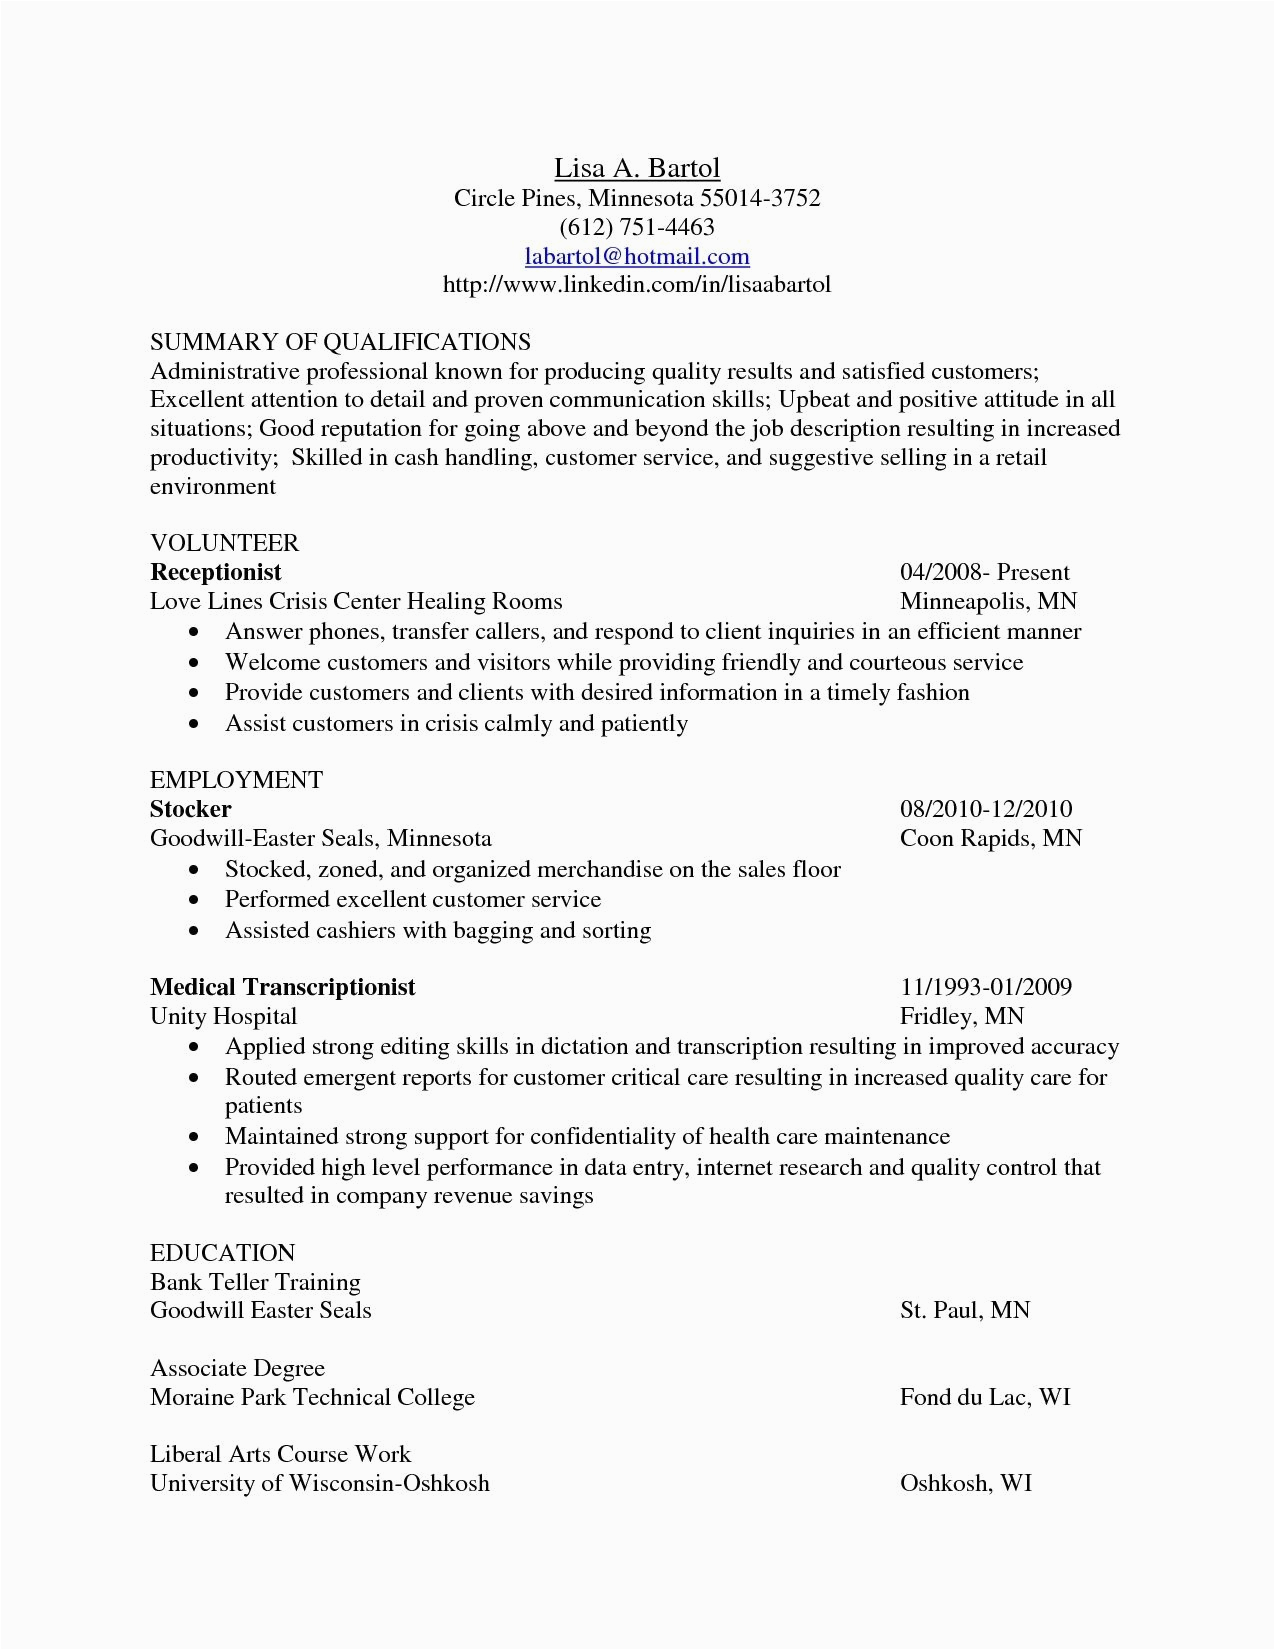 Sample Resume for Medical Transcriptionist with No Experience Sample Cover Letter for Transcriptionist with No Experience